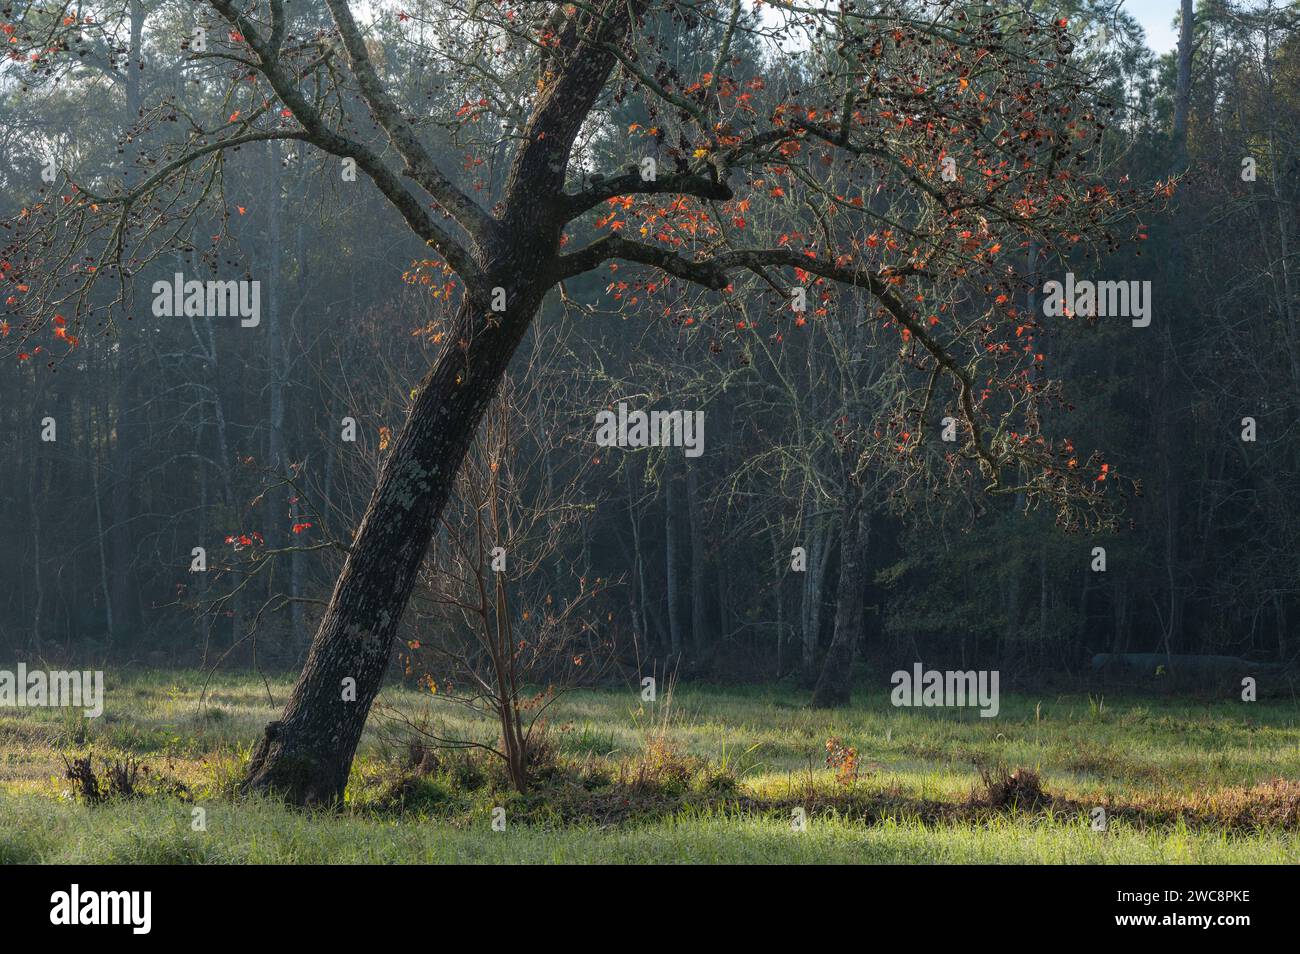 A leaning tree grows in a clearing in the forest, its few remaining leaves sparkling in the morning light. Stock Photo